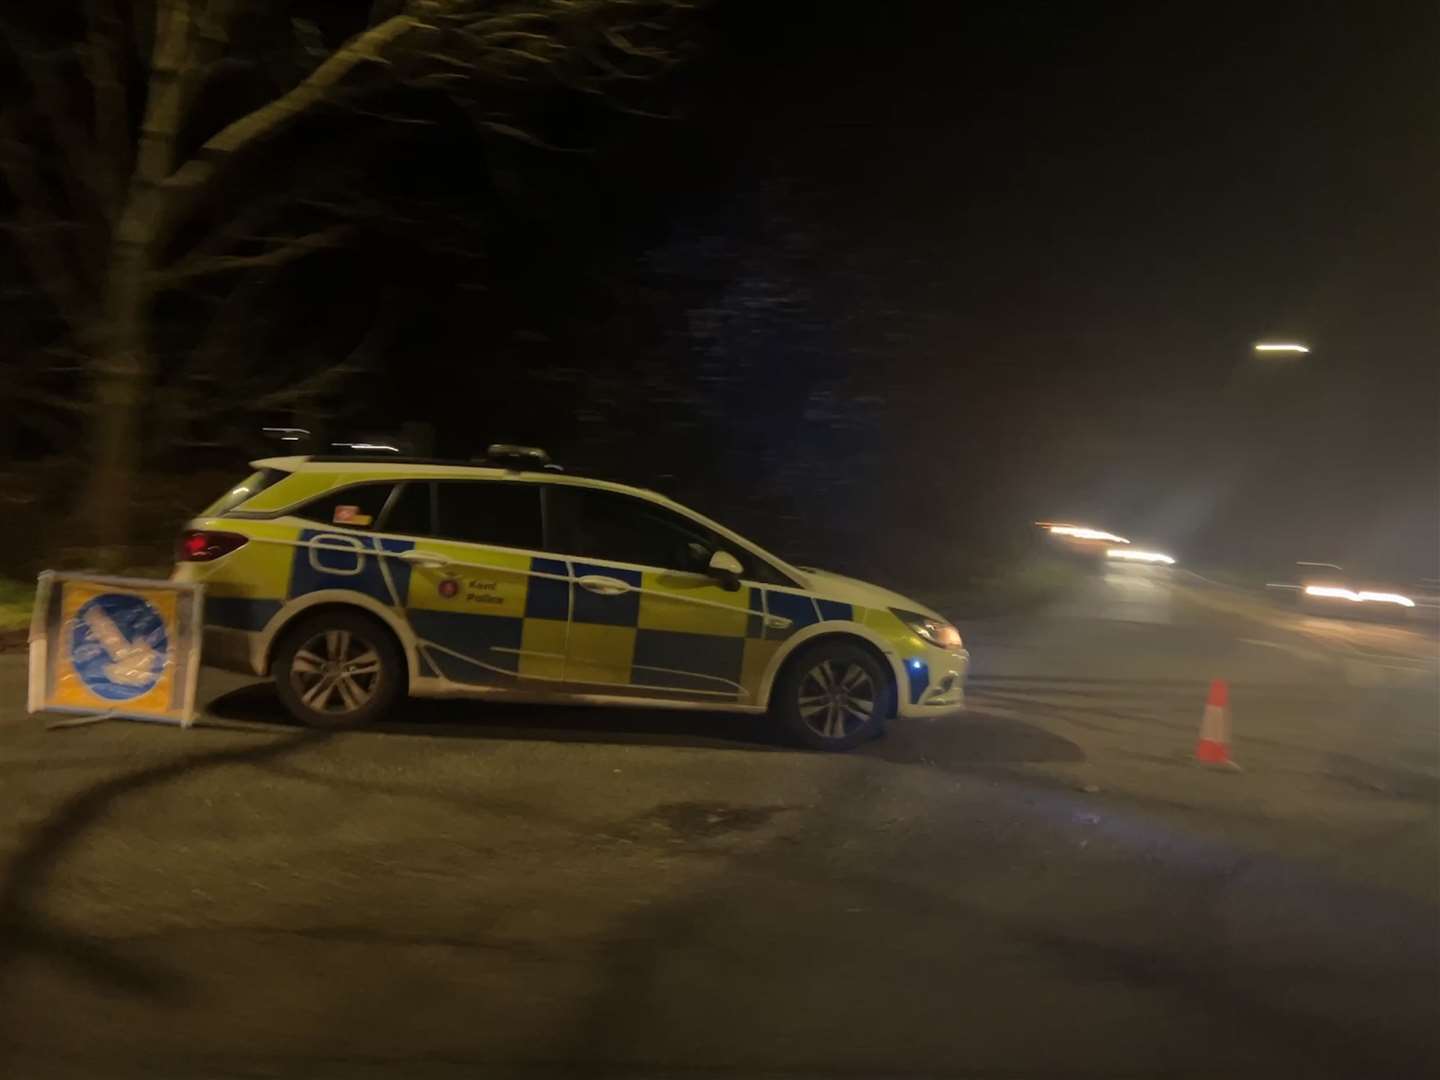 Police have closed part of the A2 in Faversham